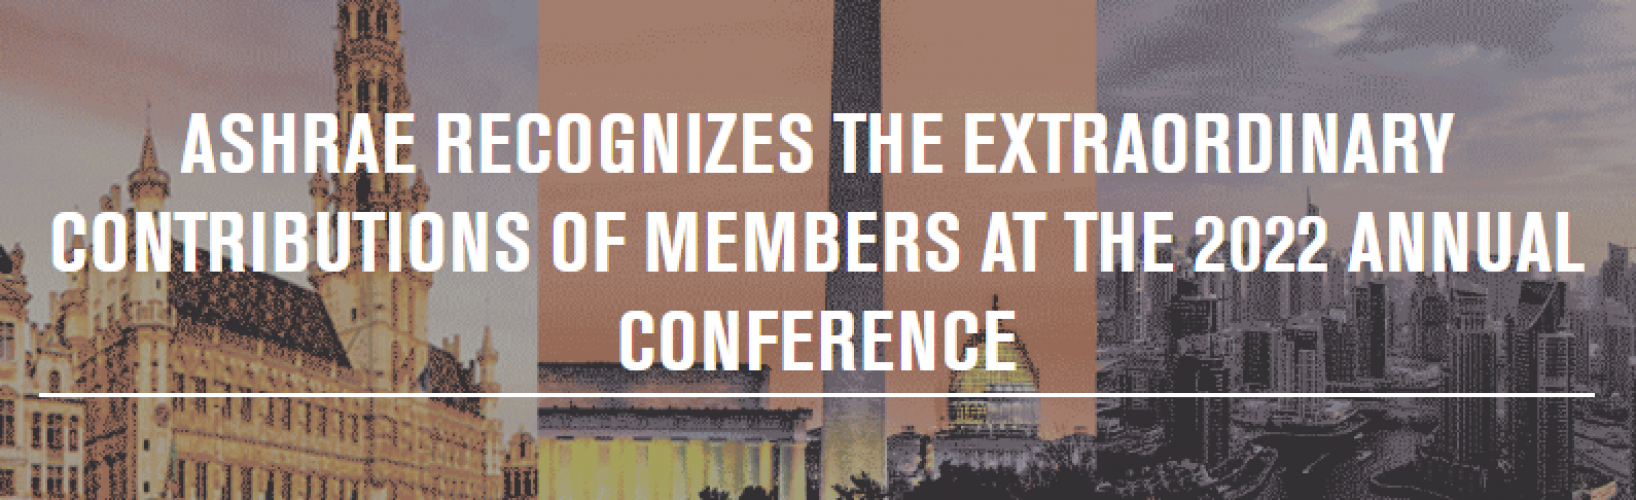 ashrae-recognizes-the-extraordinary-contributions-of-members-at-the-2022-annual-conference